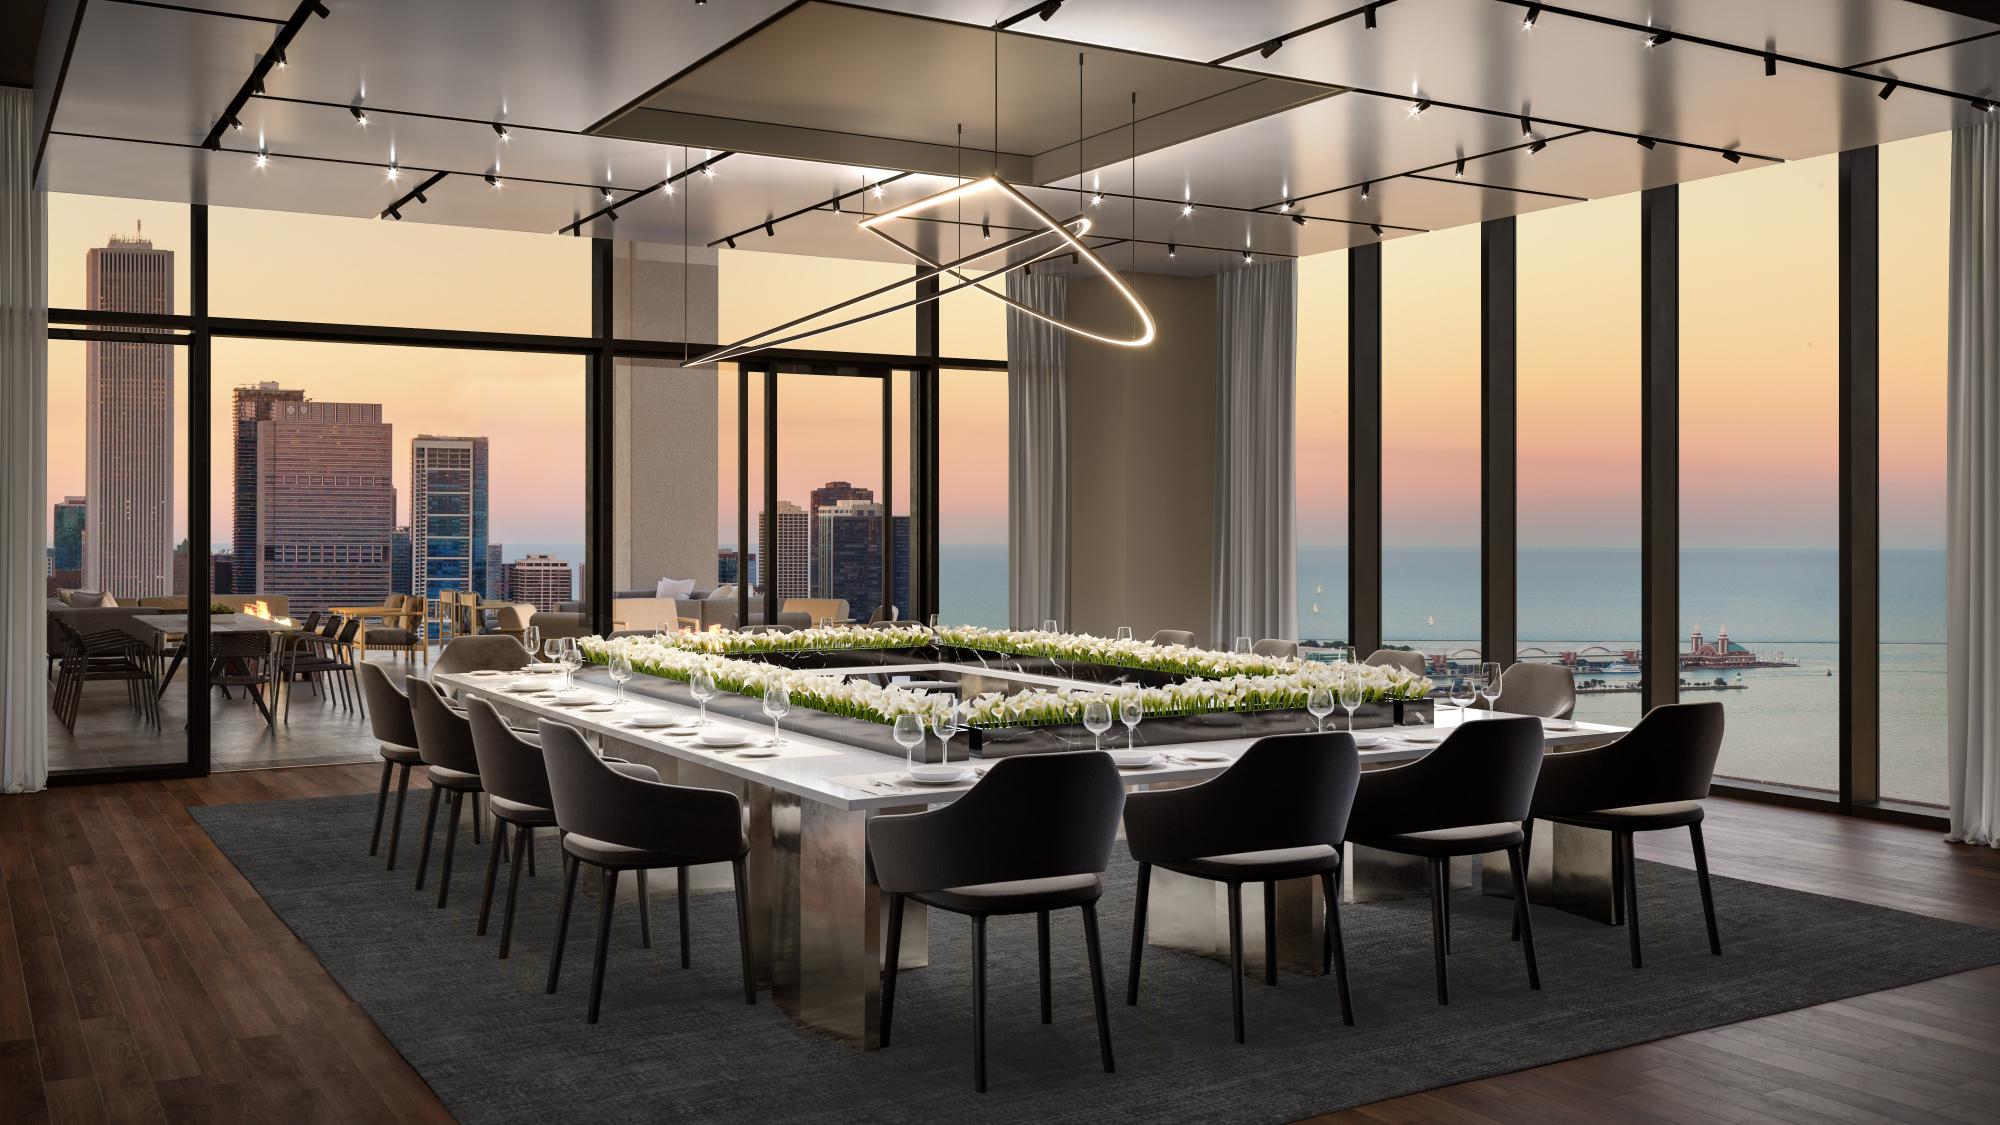 The Chicago Room ballroom, with spectacular lake and park views, opens onto the Skyline Terrace.